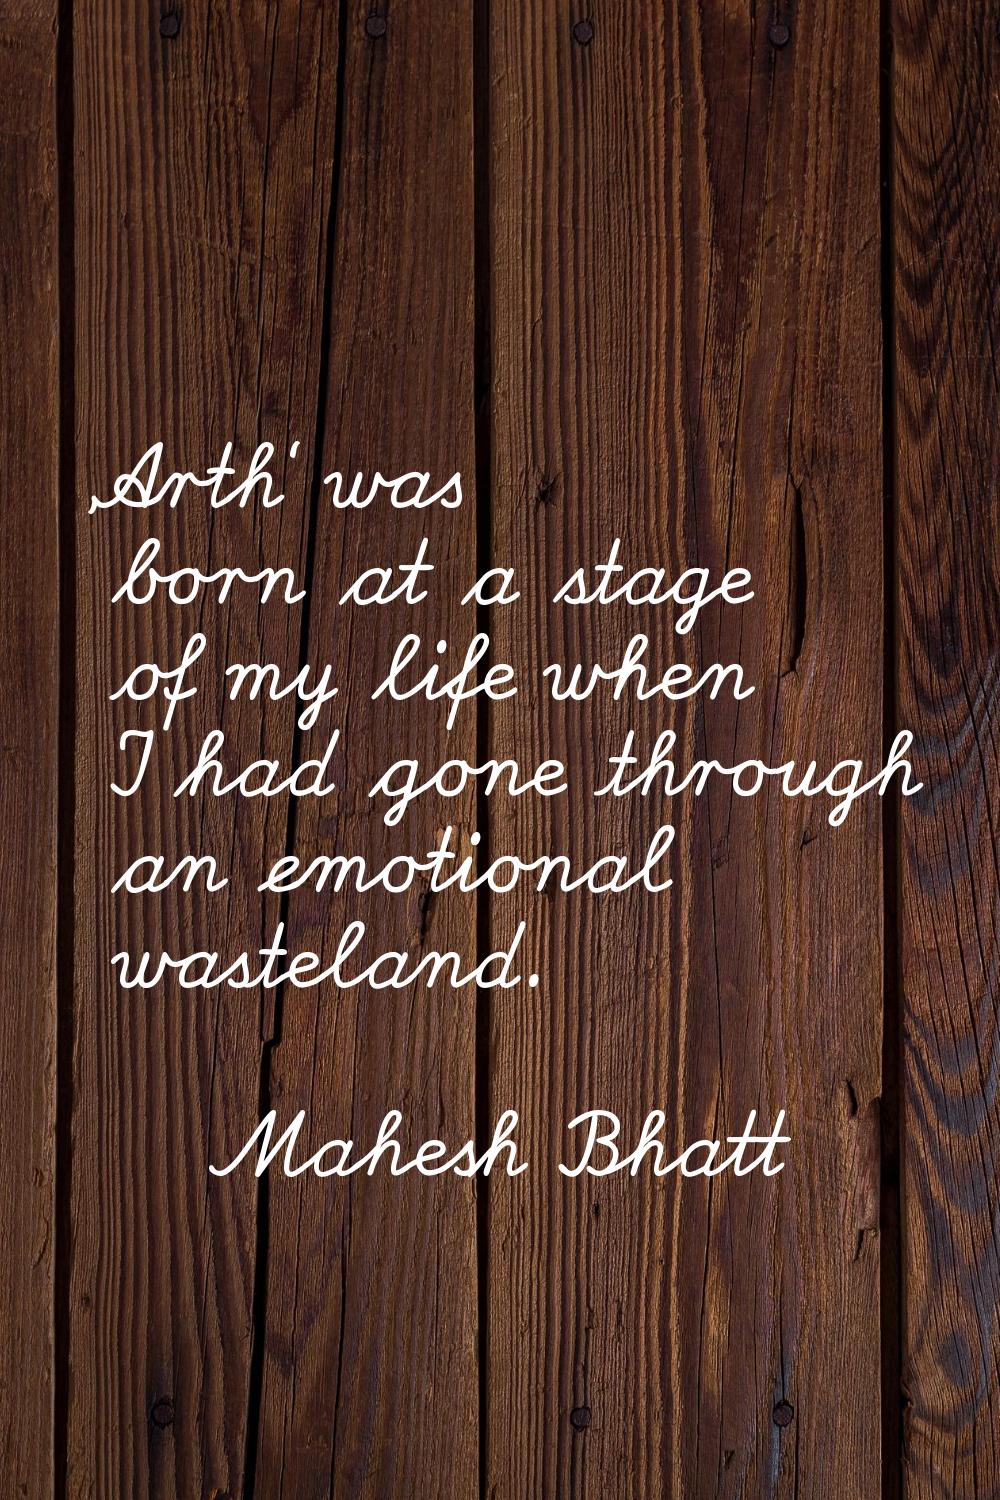 'Arth' was born at a stage of my life when I had gone through an emotional wasteland.